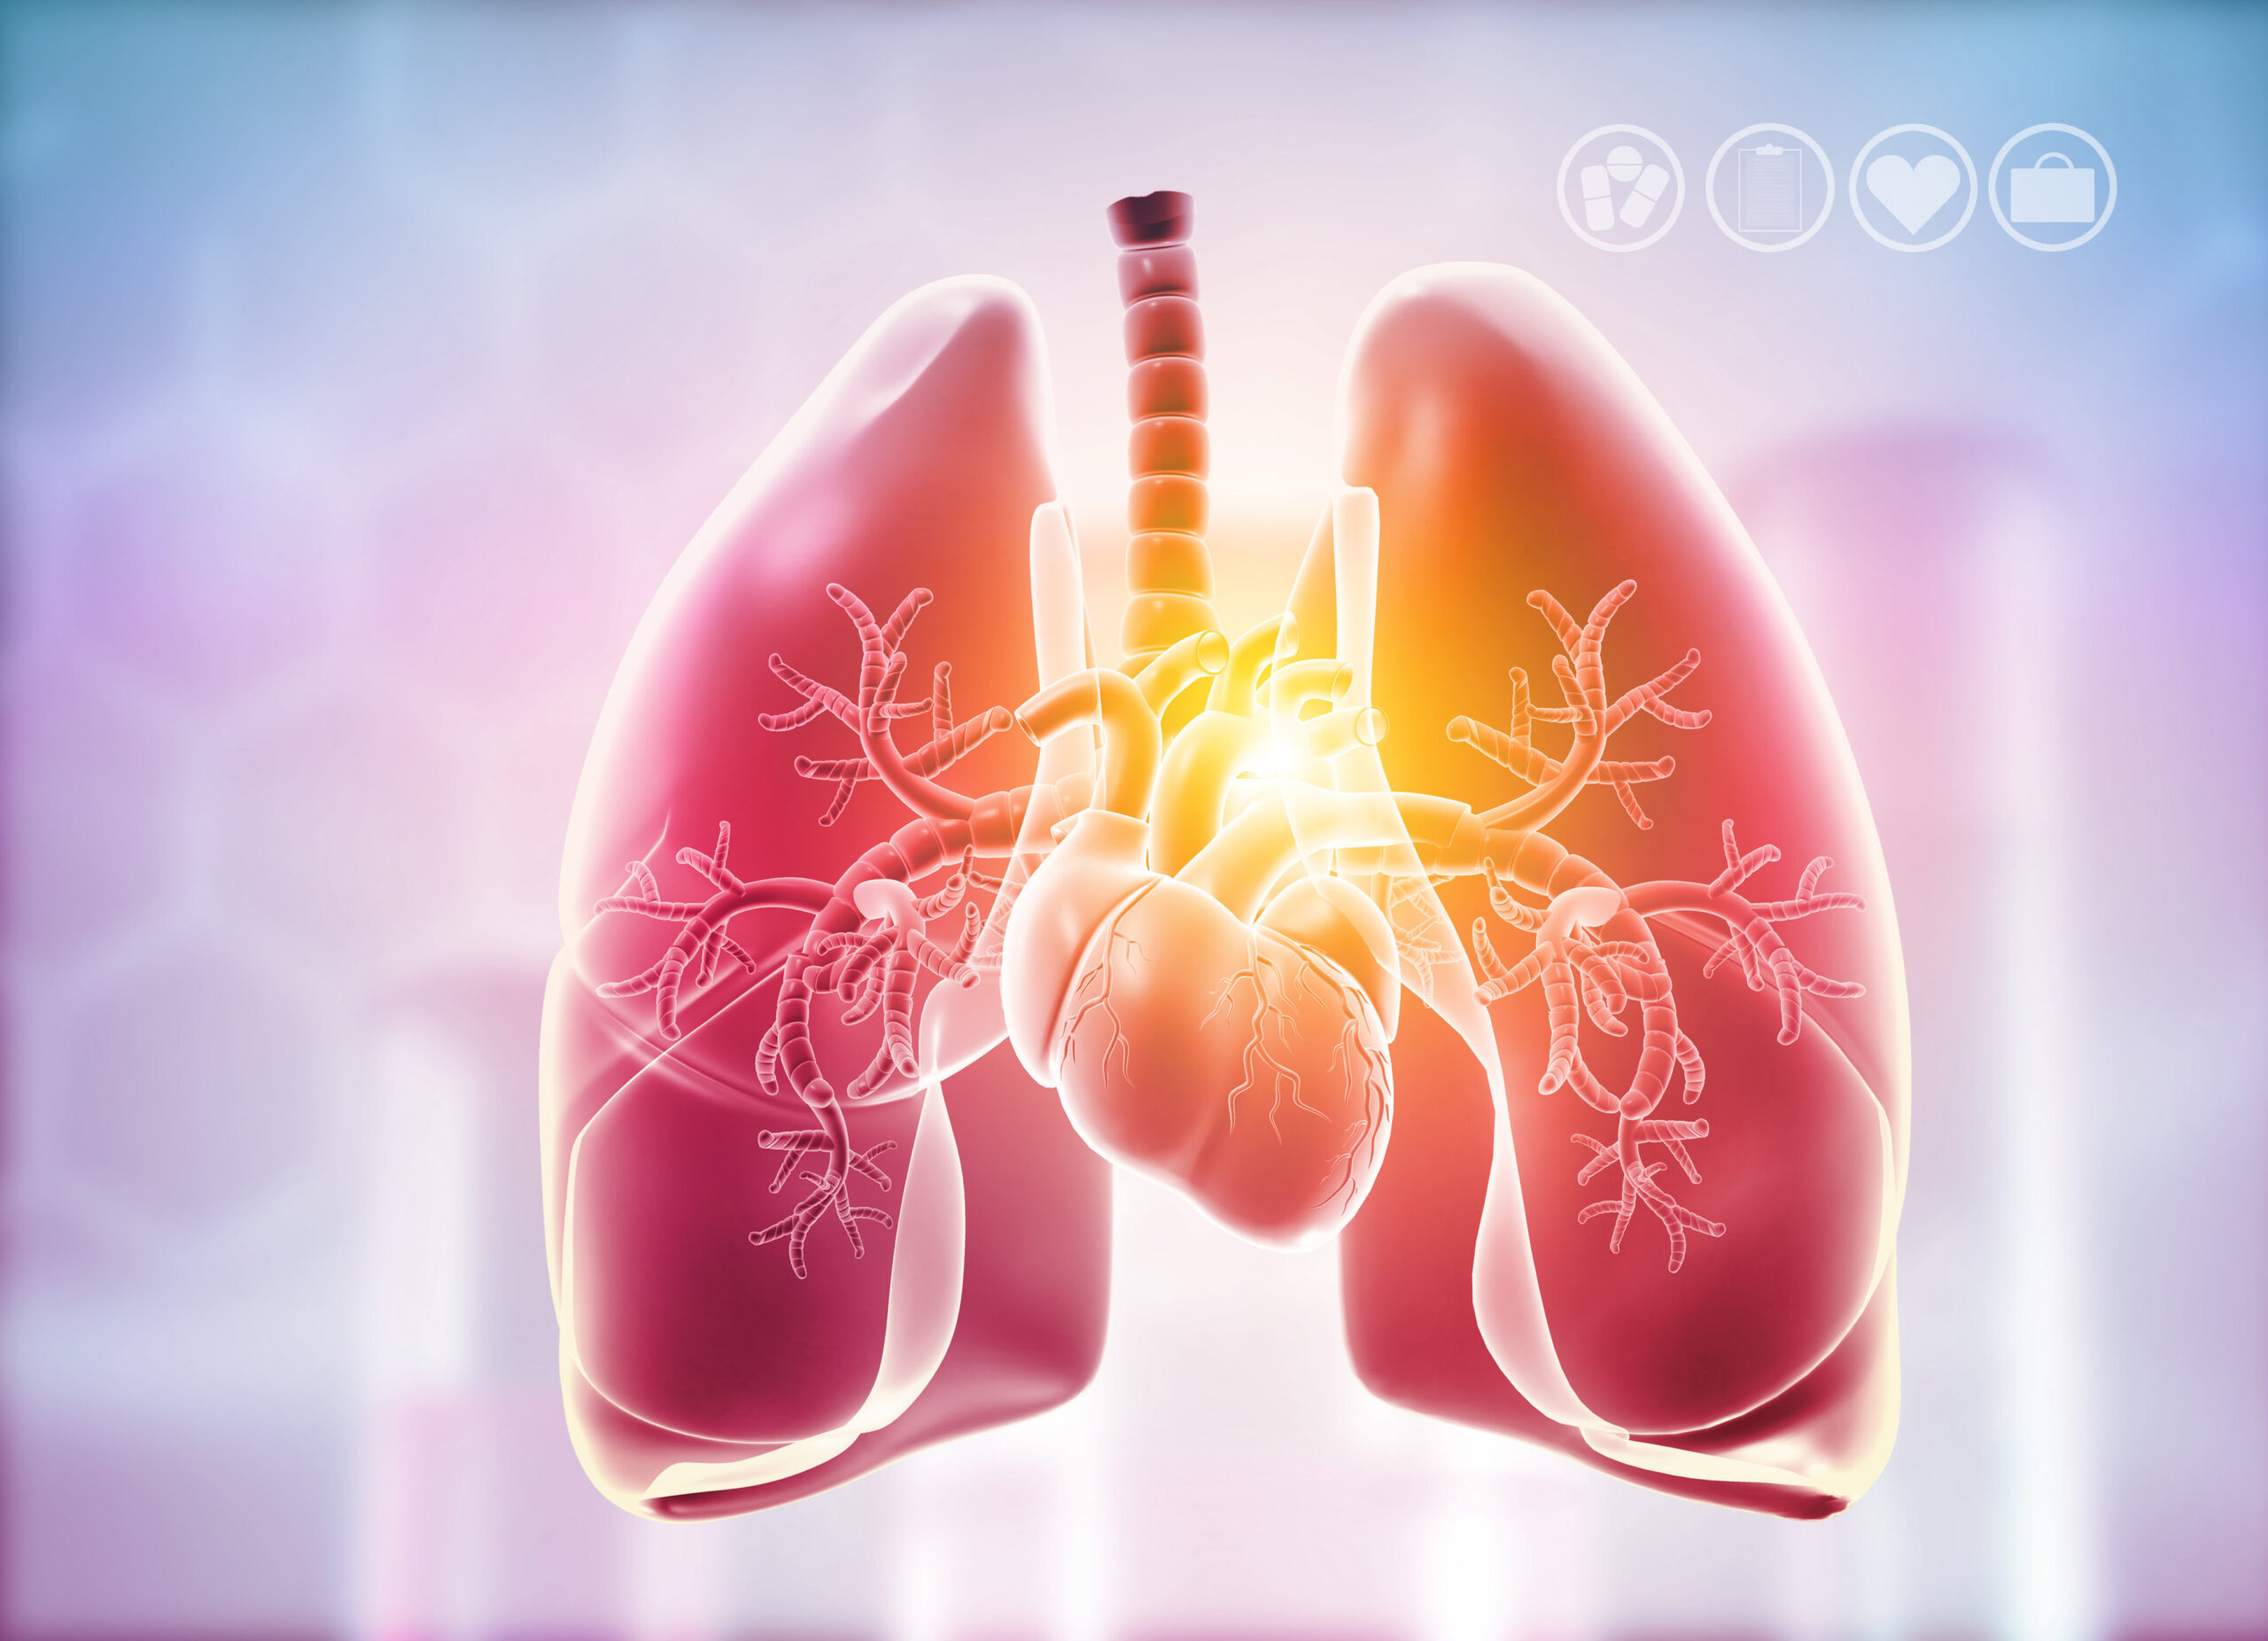 lung cancer treatment